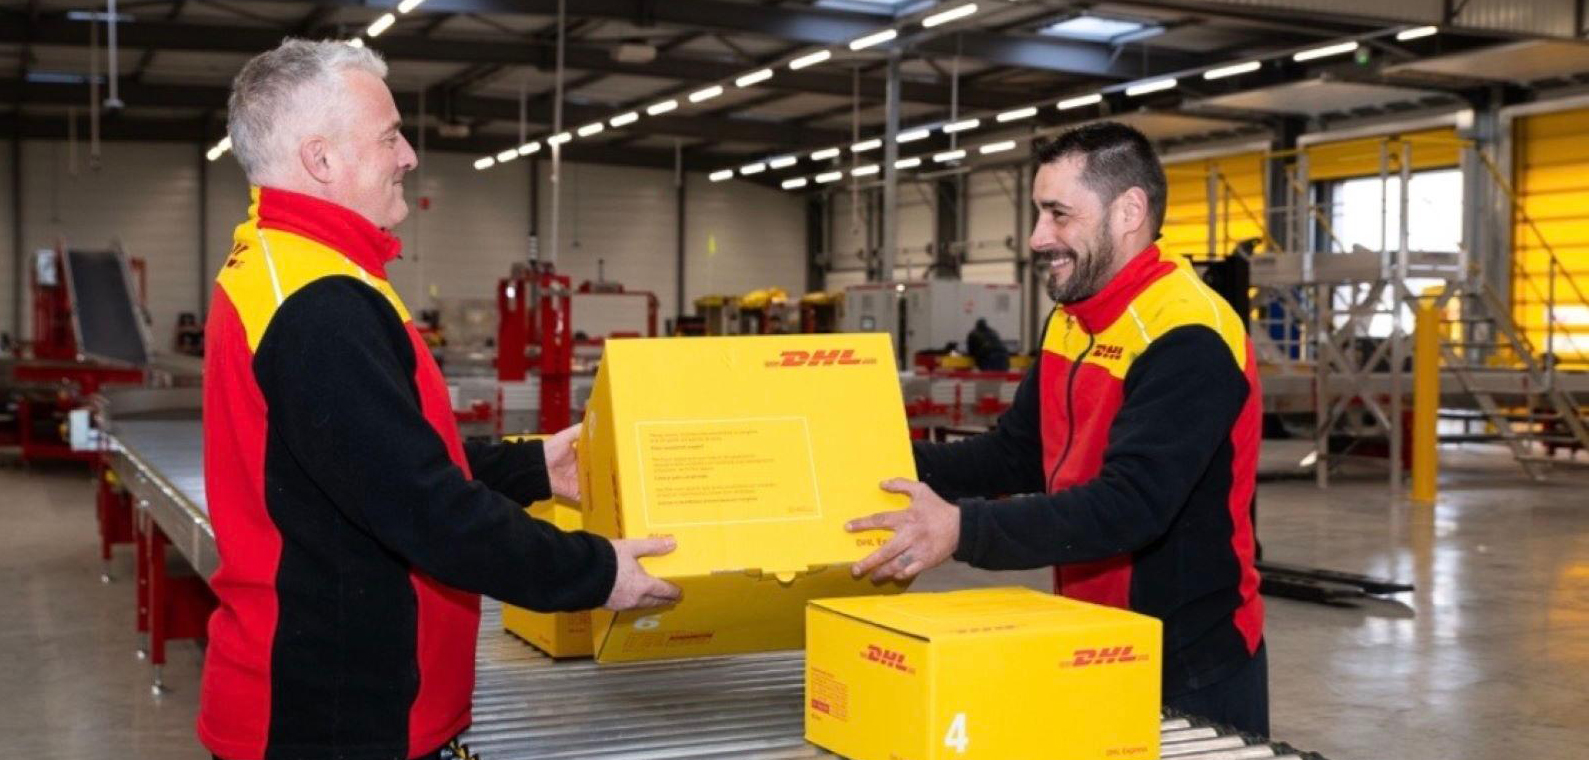 DHL Express expands in eastern France - Parcel and Postal Technology ...